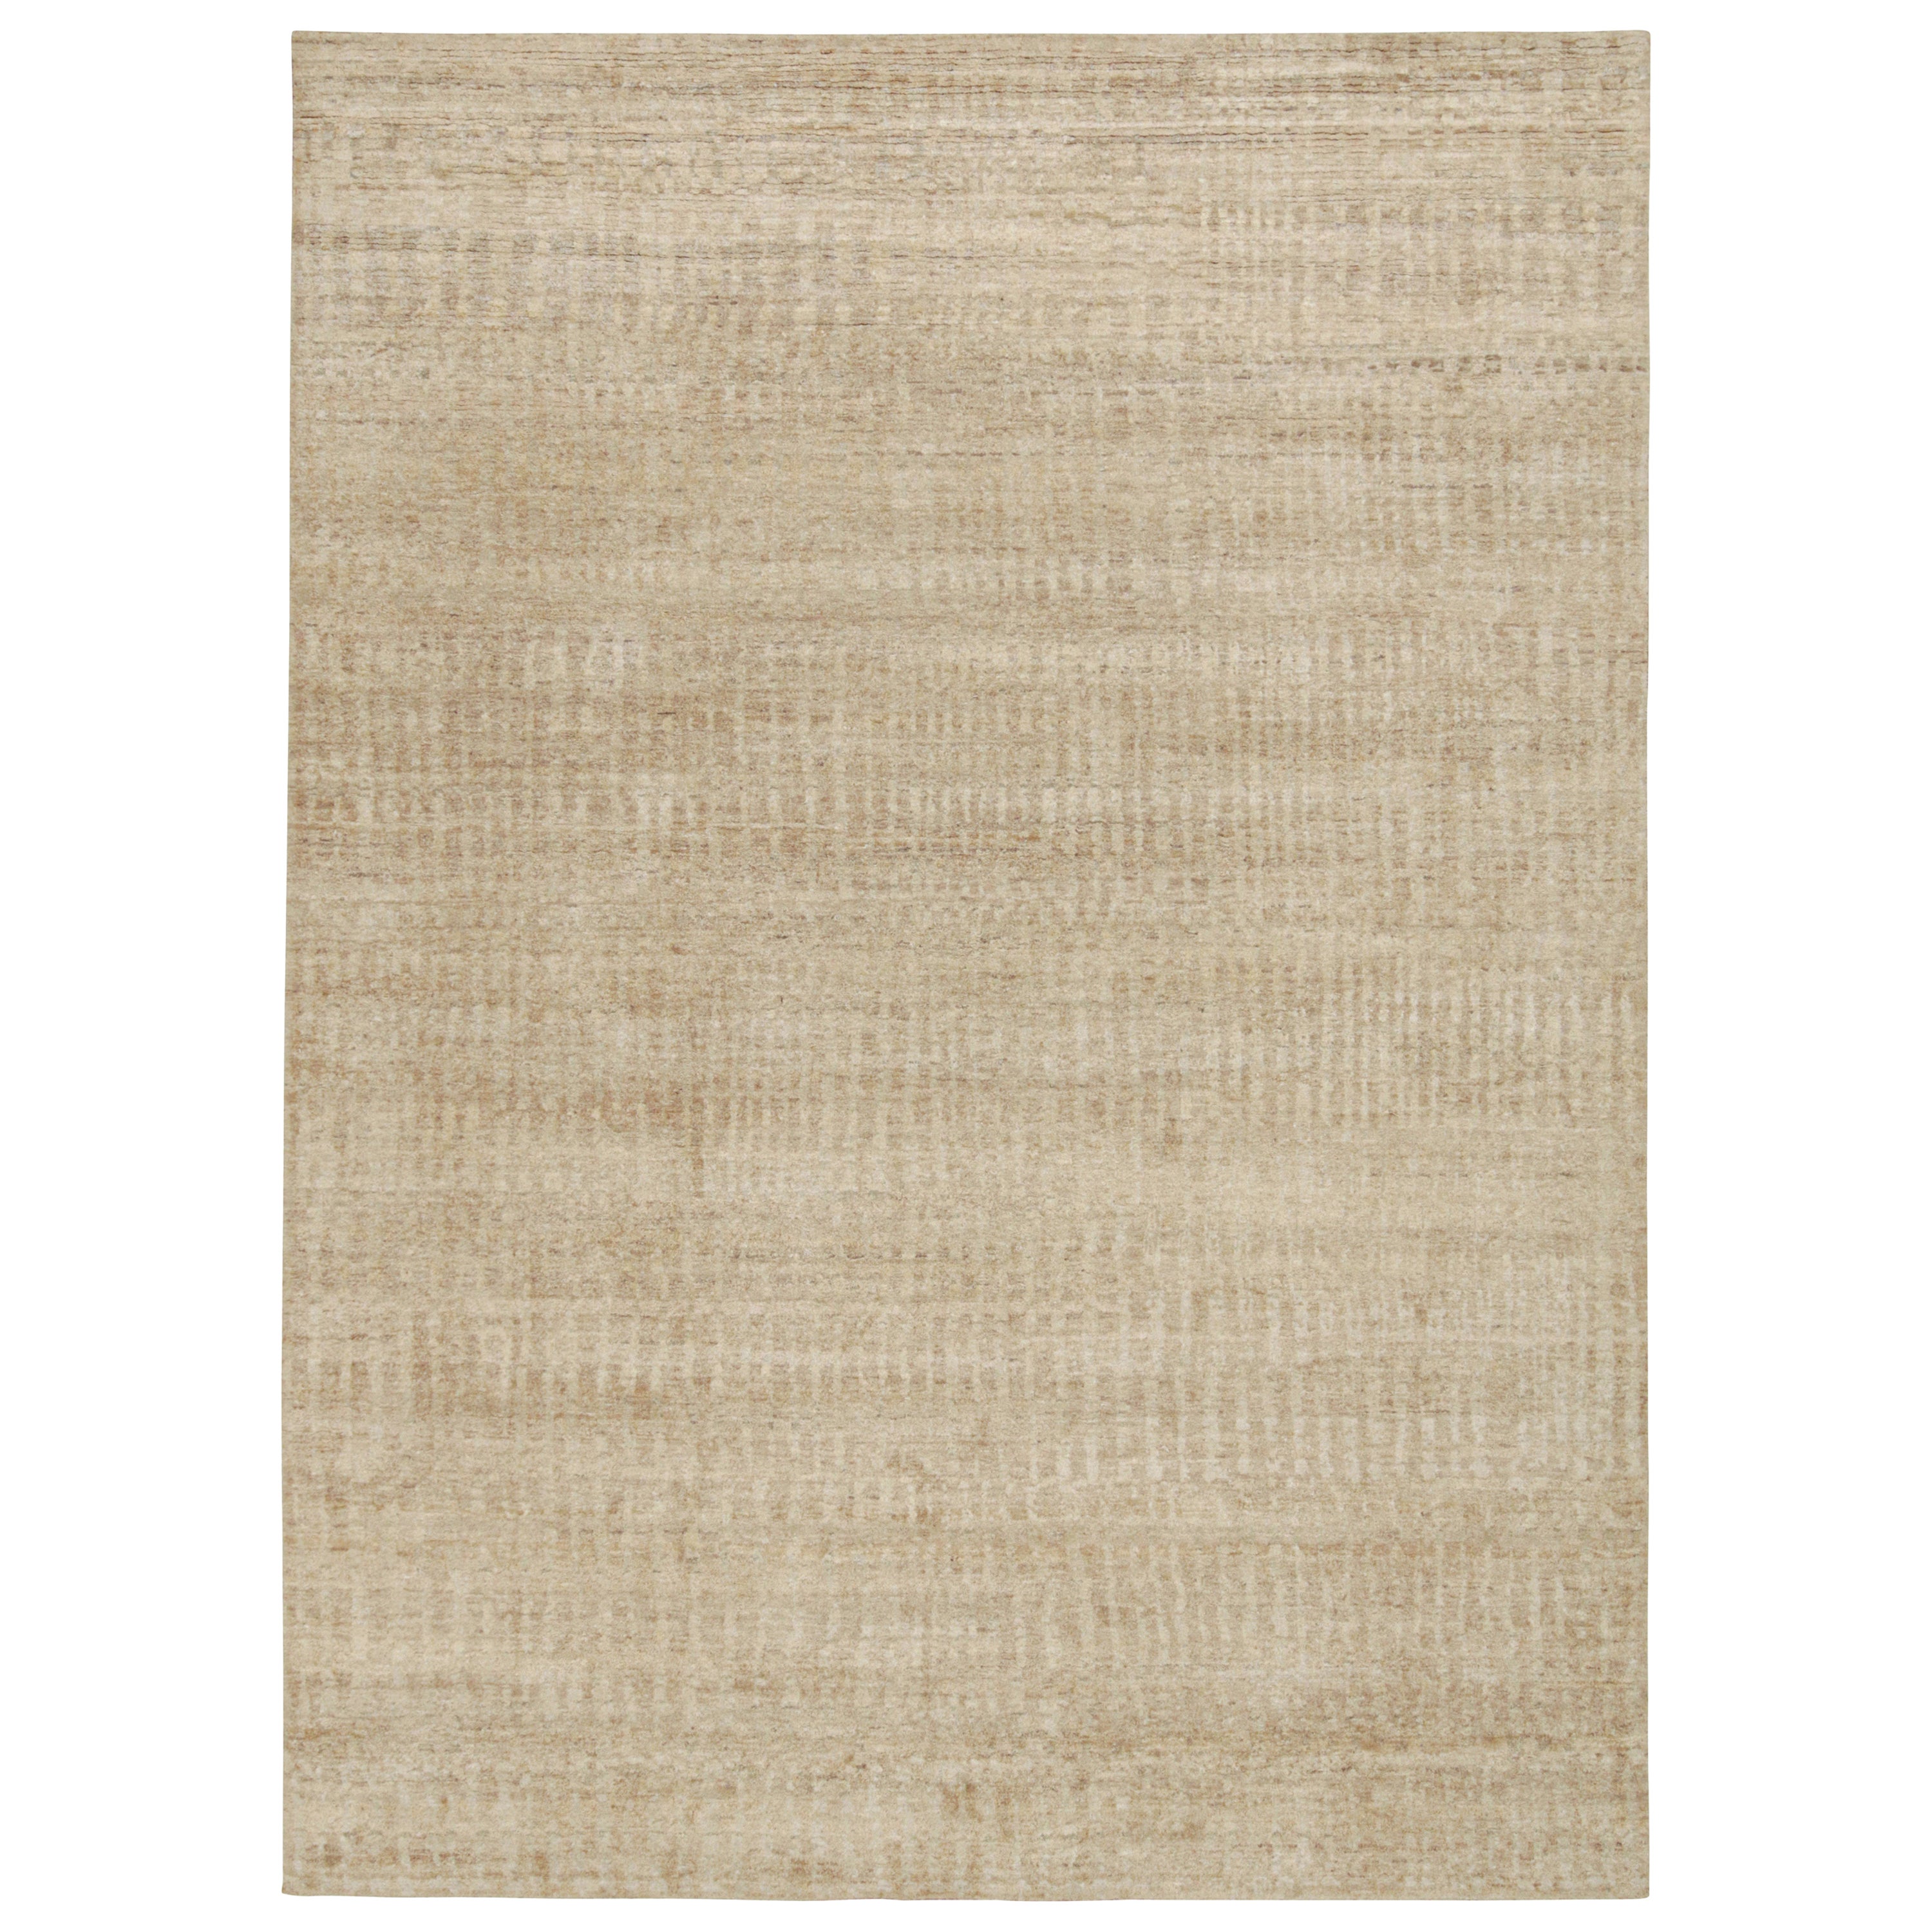 Rug & Kilim’s Contemporary Rug in Beige-Brown Tone-on-tone Striae For Sale